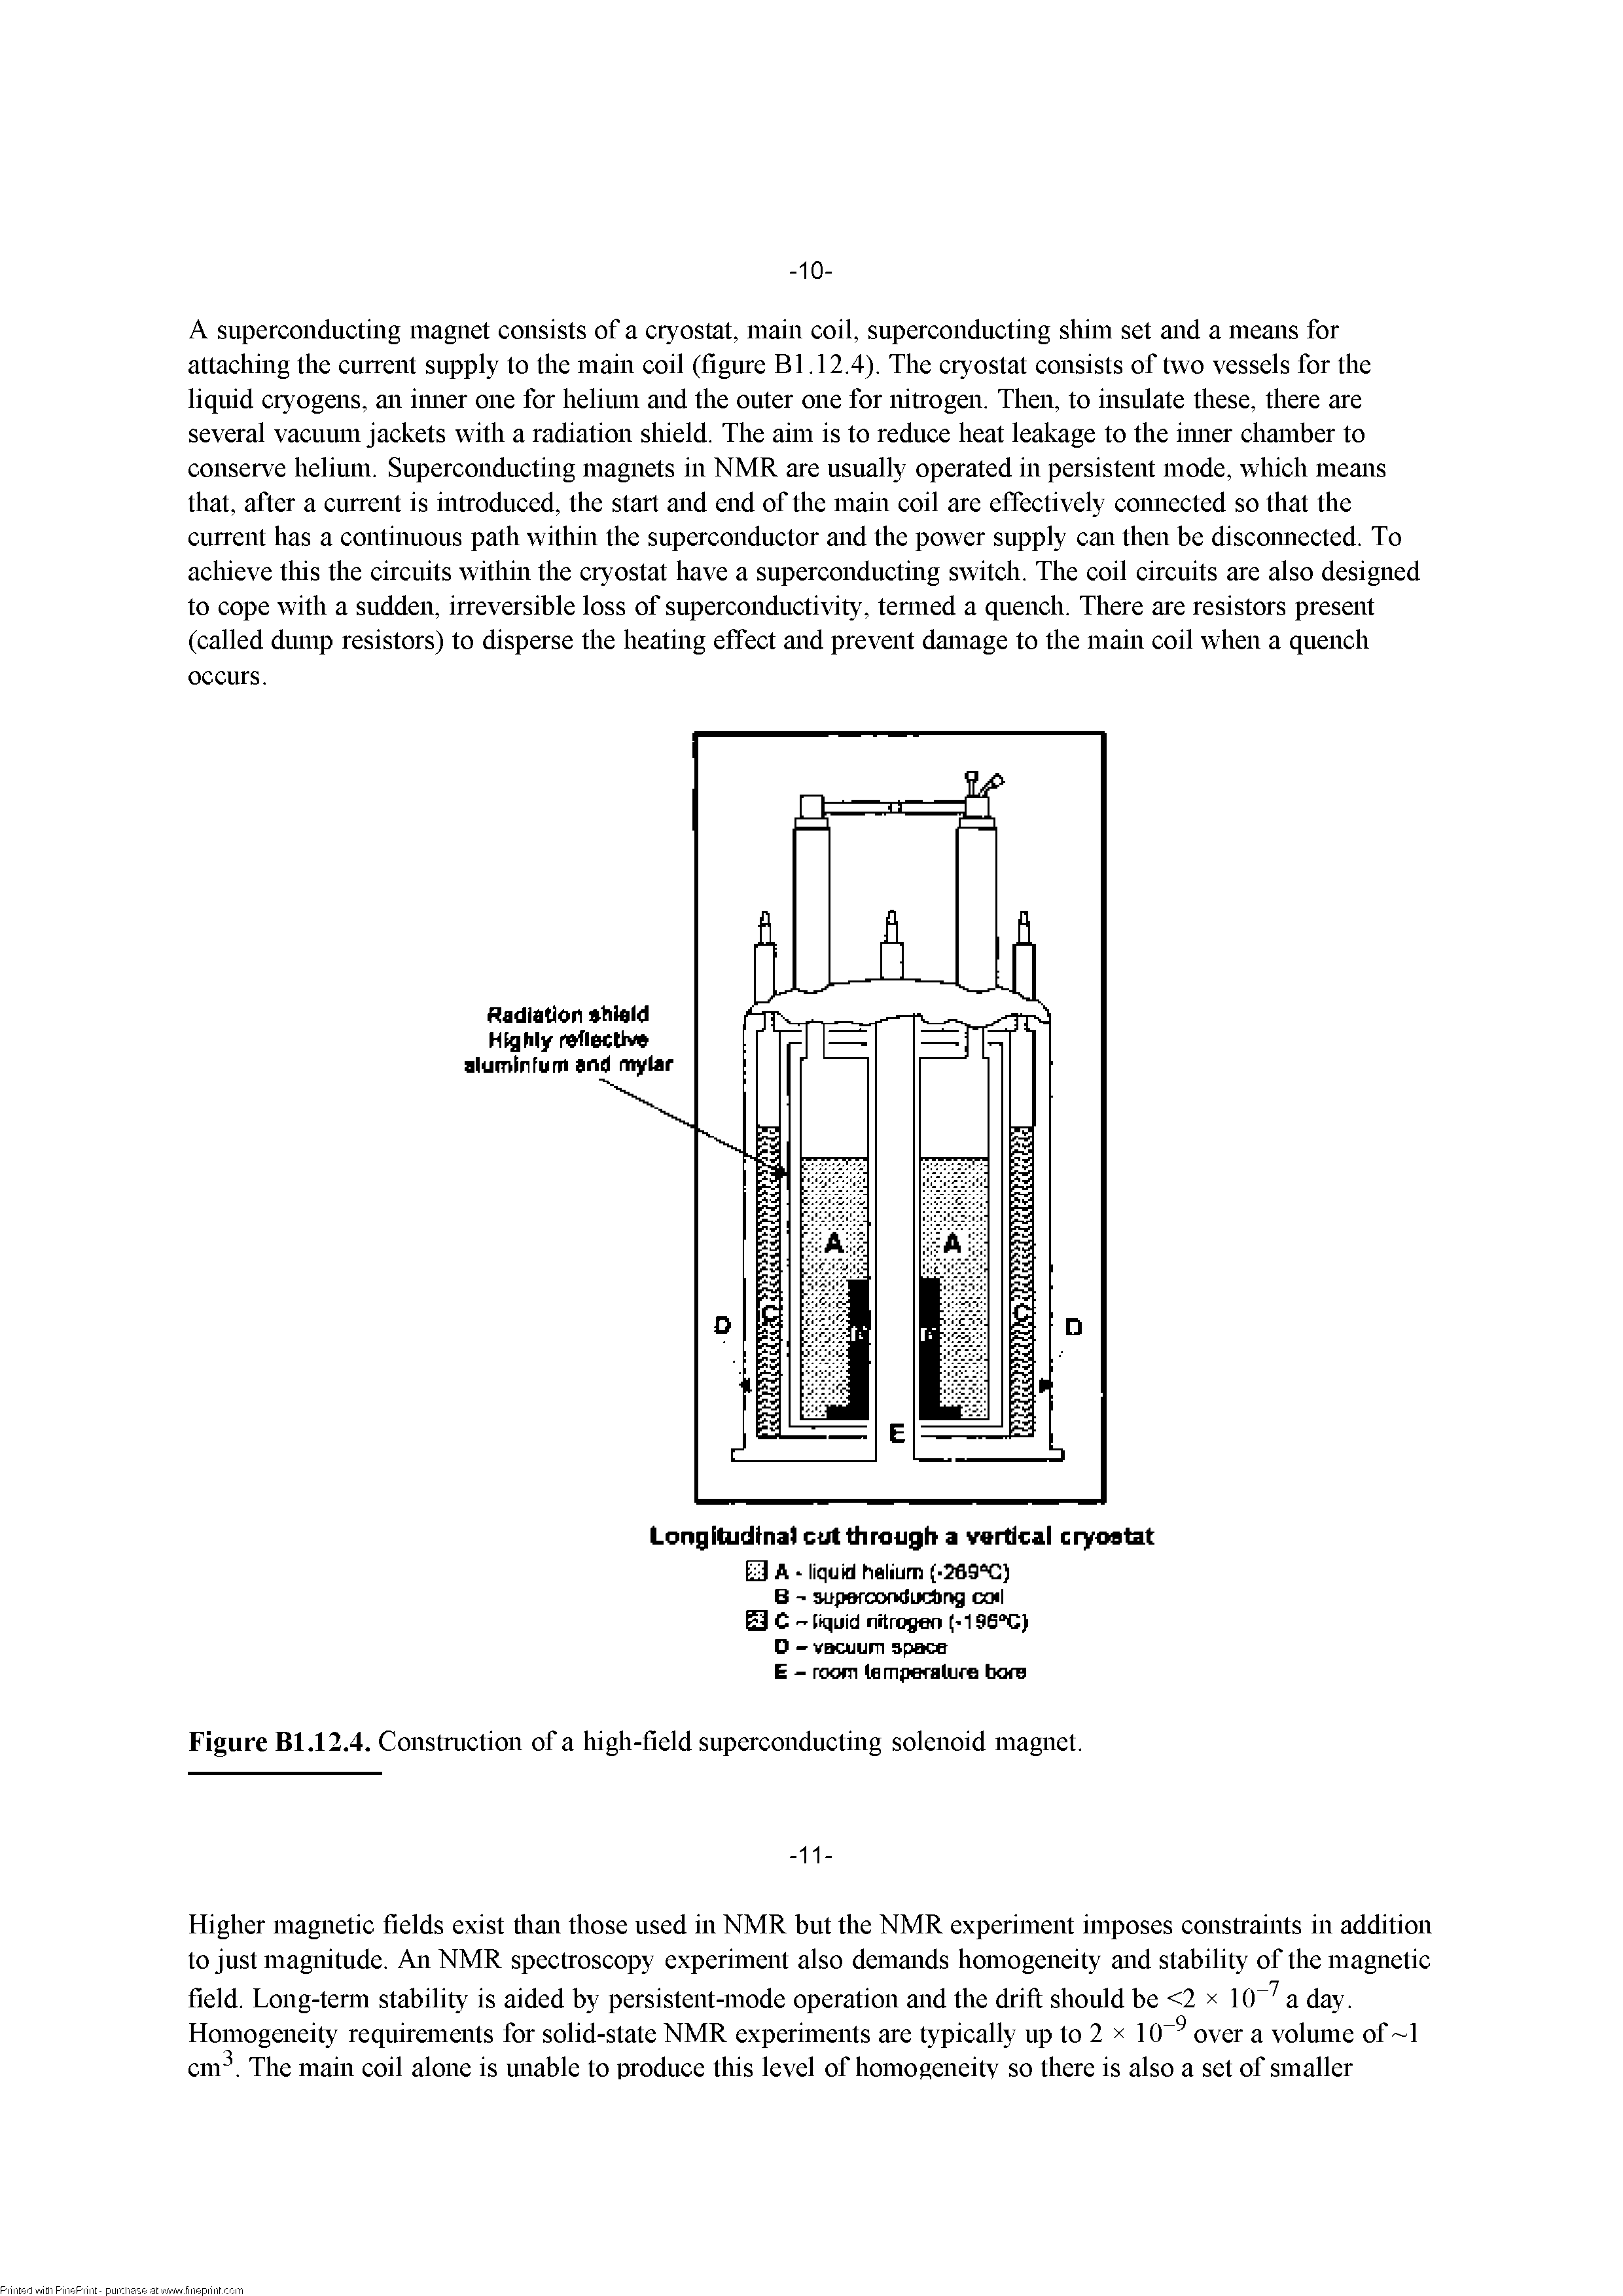 Figure Bl.12.4. Construction of a high-field superconducting solenoid magnet.